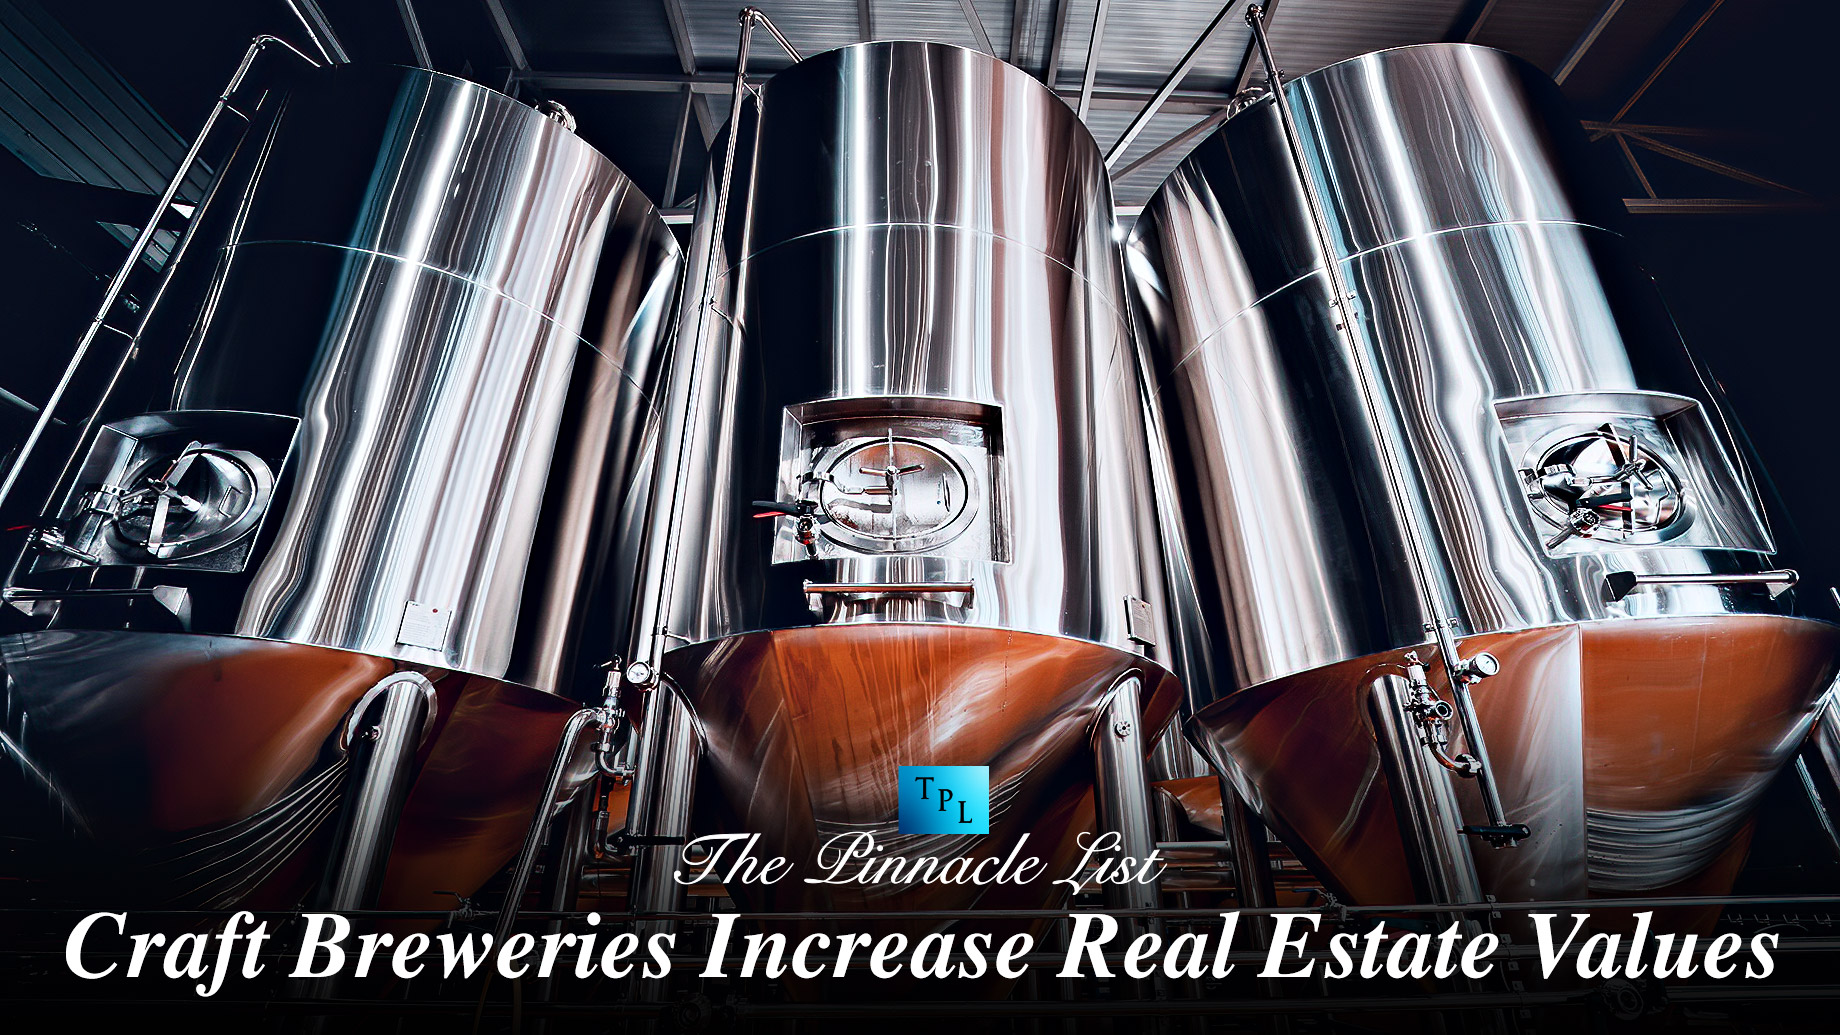 Craft Breweries Increase Real Estate Values